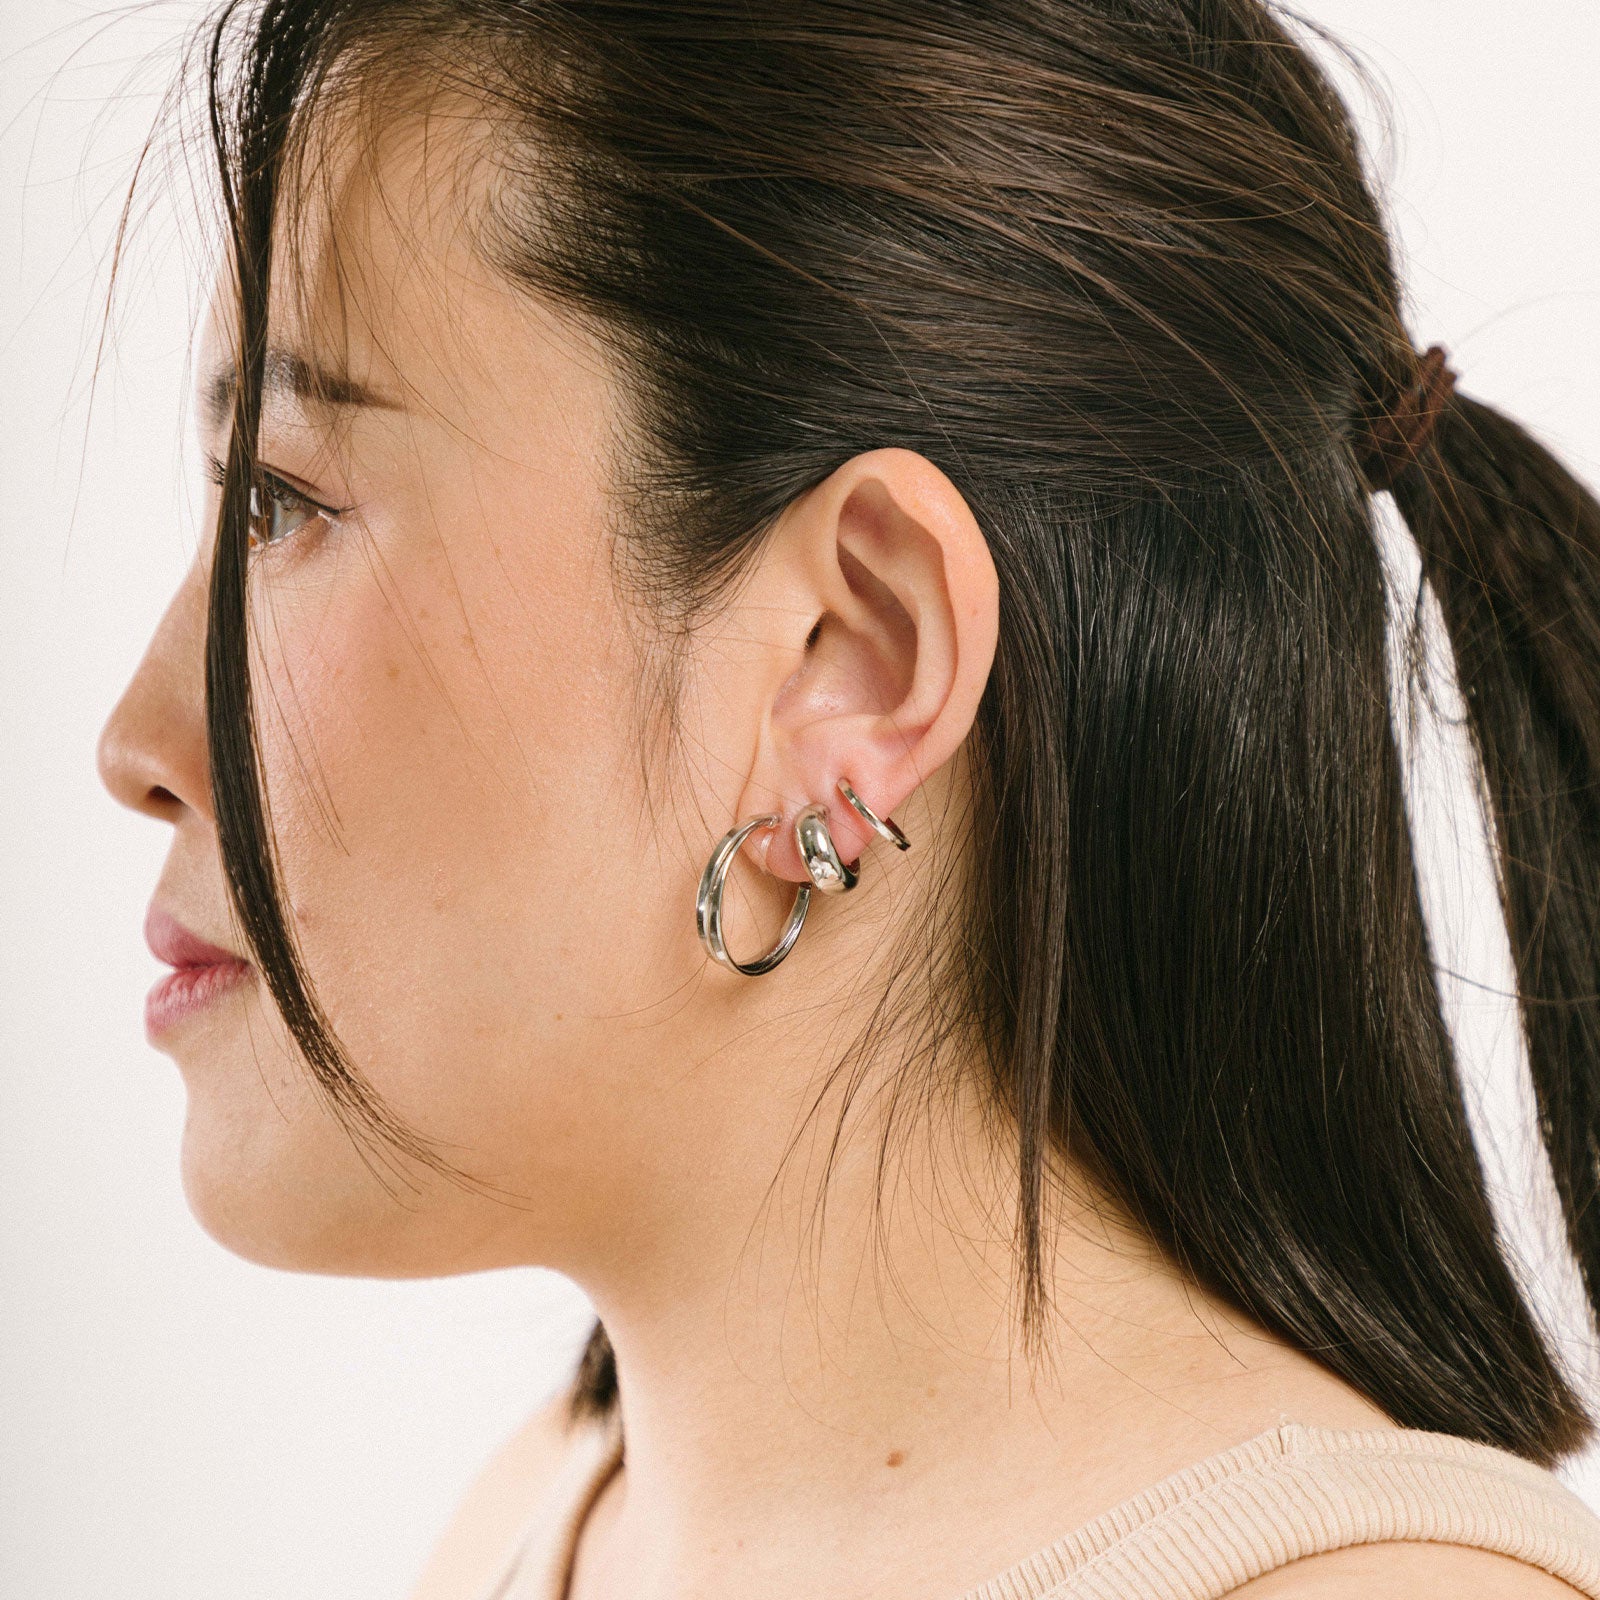 A model wearing the Everyday Essentials Set features three closure types: invisible resin, sliding spring and mosquito coil. It includes a Simple Silver Huggie Clip-On, Mini Hoop Earrings and Silver Cassie Hoop Earrings. Crafted from copper alloy, stainless steel and silver tone metal alloy, this item comes with three pairs and is also available in Gold.